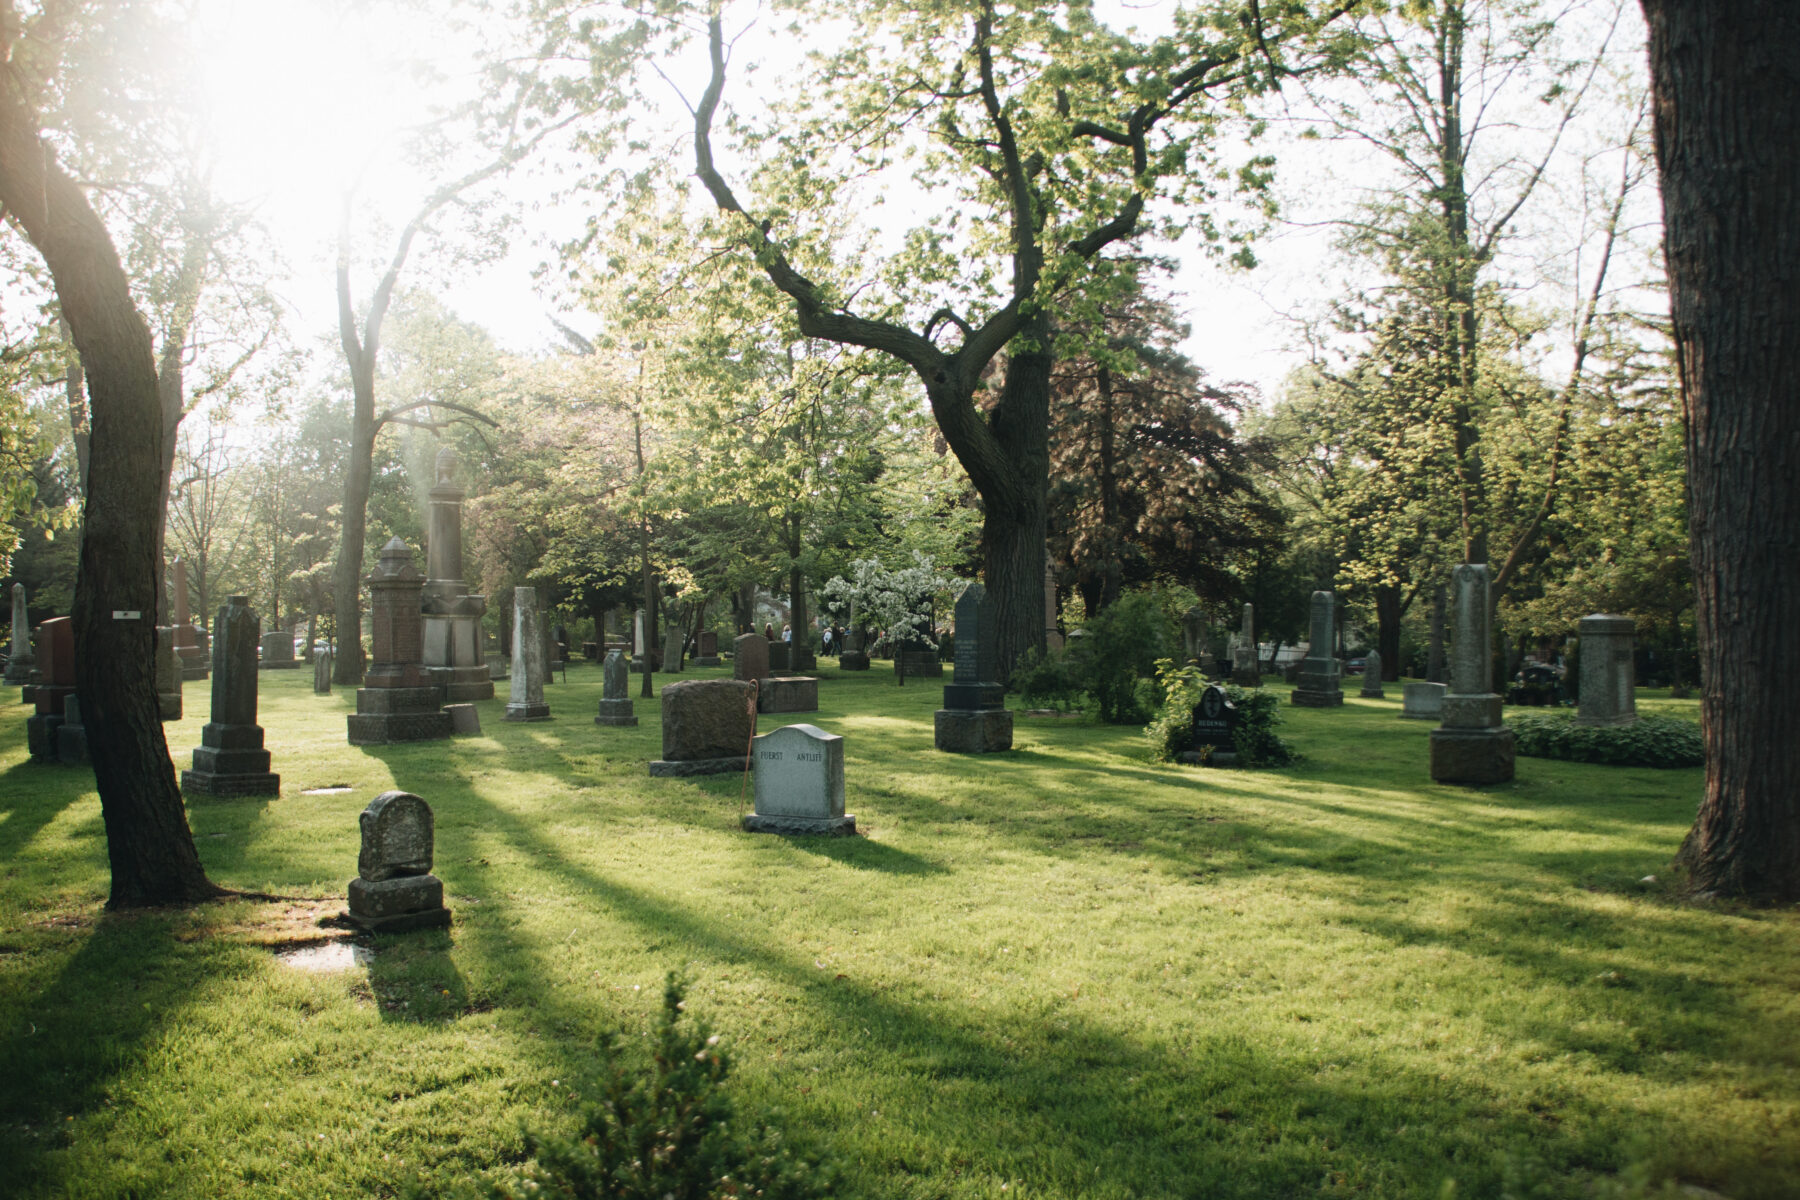 Several grave stones appear in a park-like setting with large mature trees throughout and a bright ray of sunshine visible on the upper left, casting shadows throughout the image.